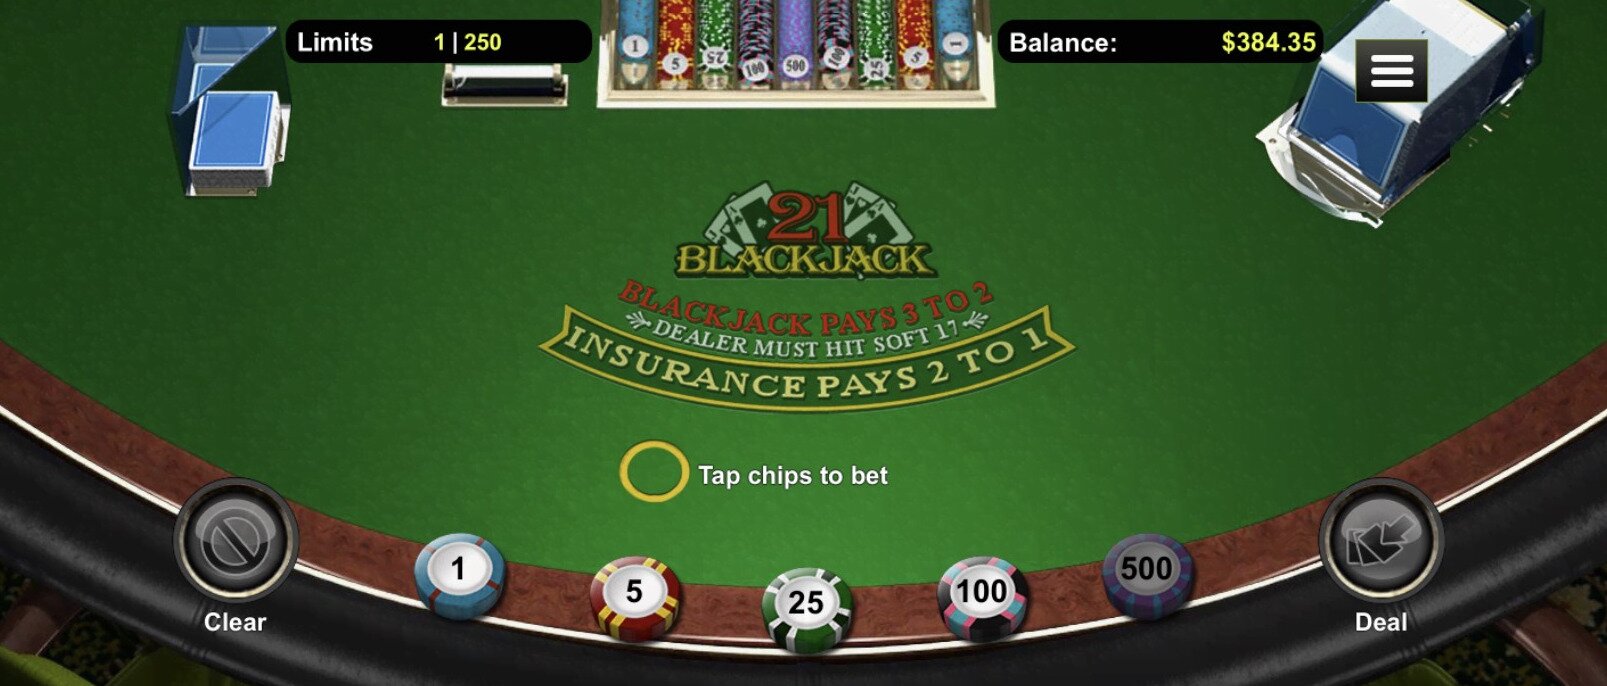 best place to play blackjack online free